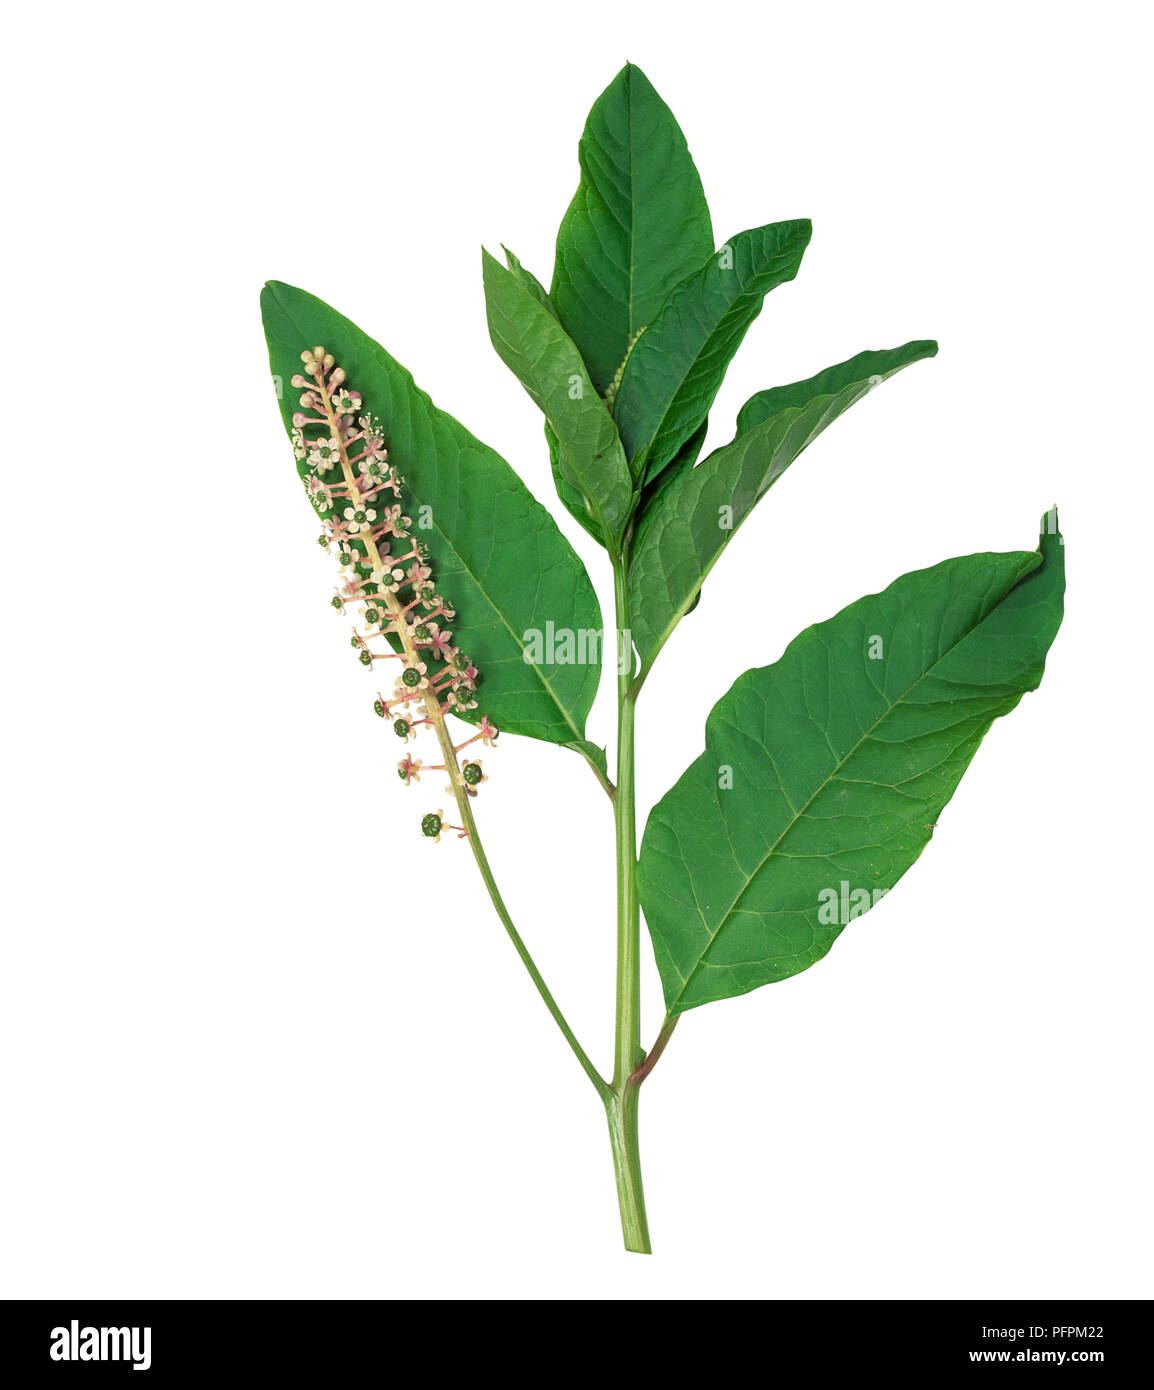 Phytolacca americana (American pokeweed), fruiting stalk with green unripe fruit, and stalk with flowers in racemes and leaves Stock Photo